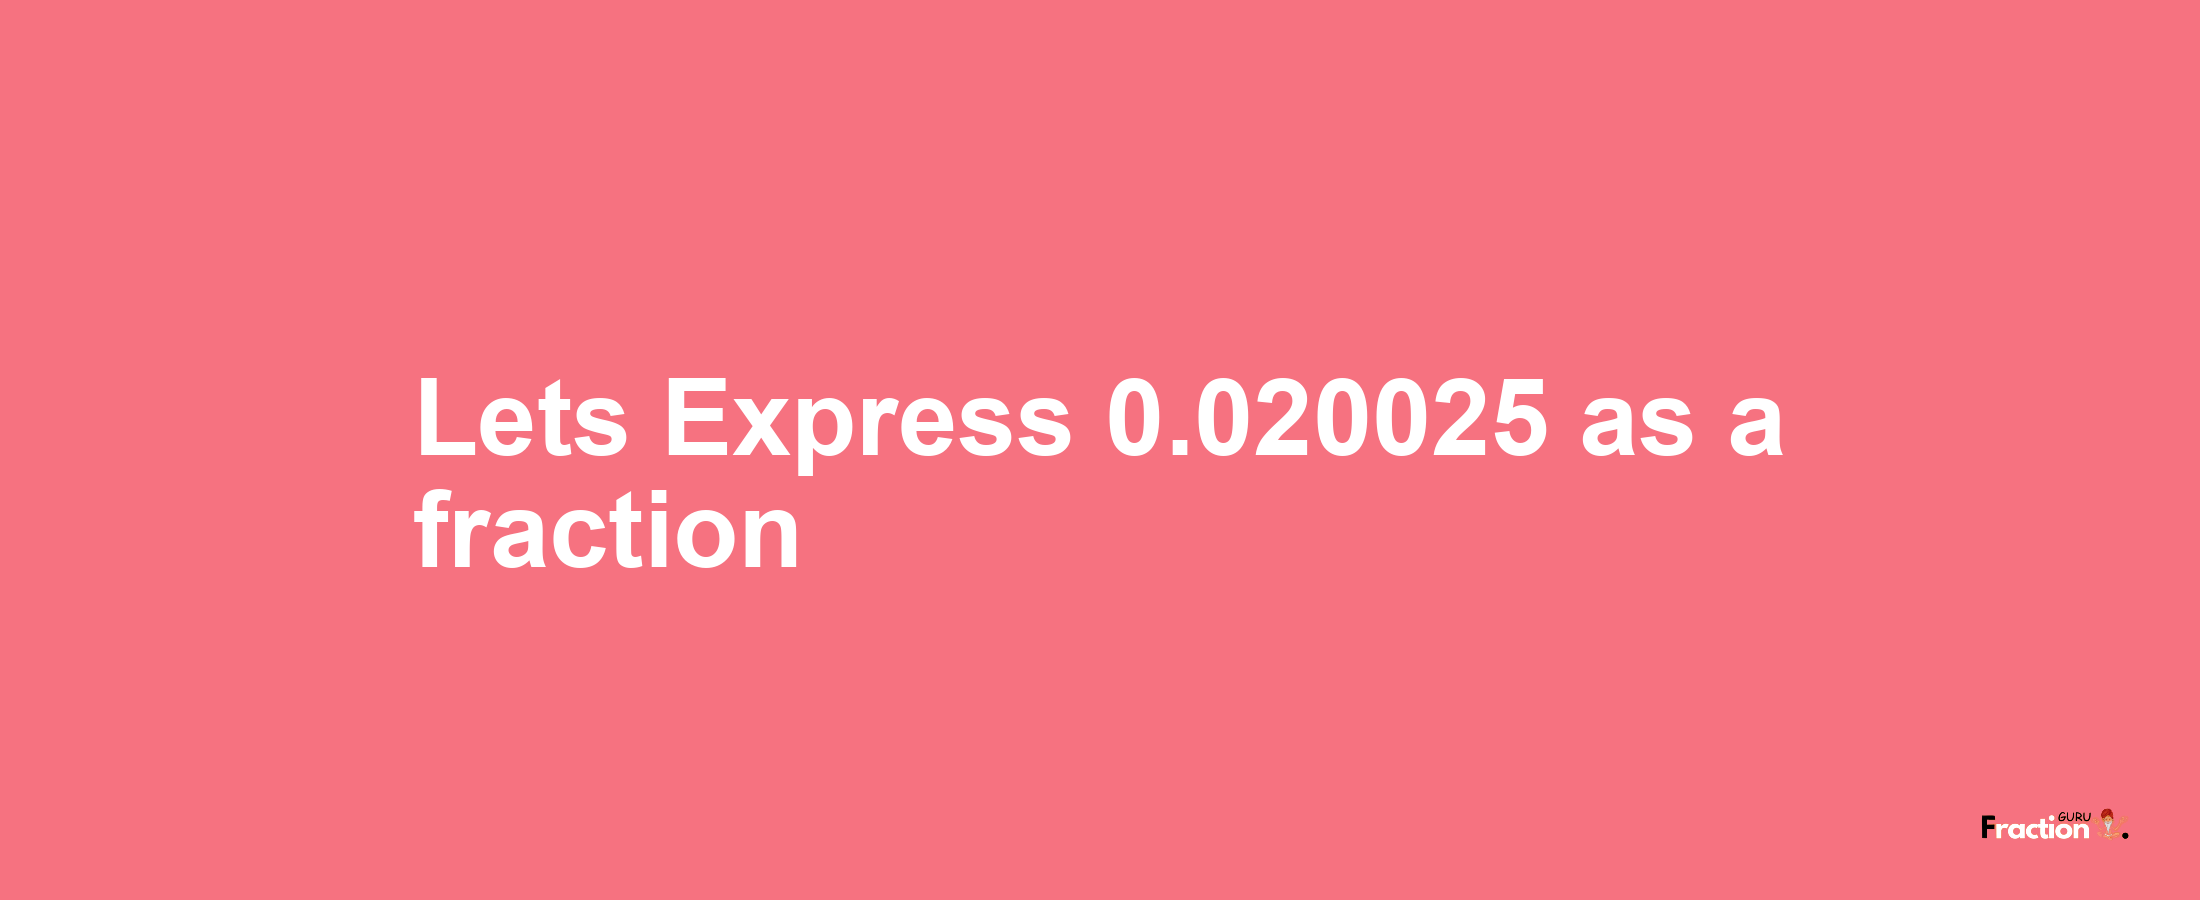 Lets Express 0.020025 as afraction